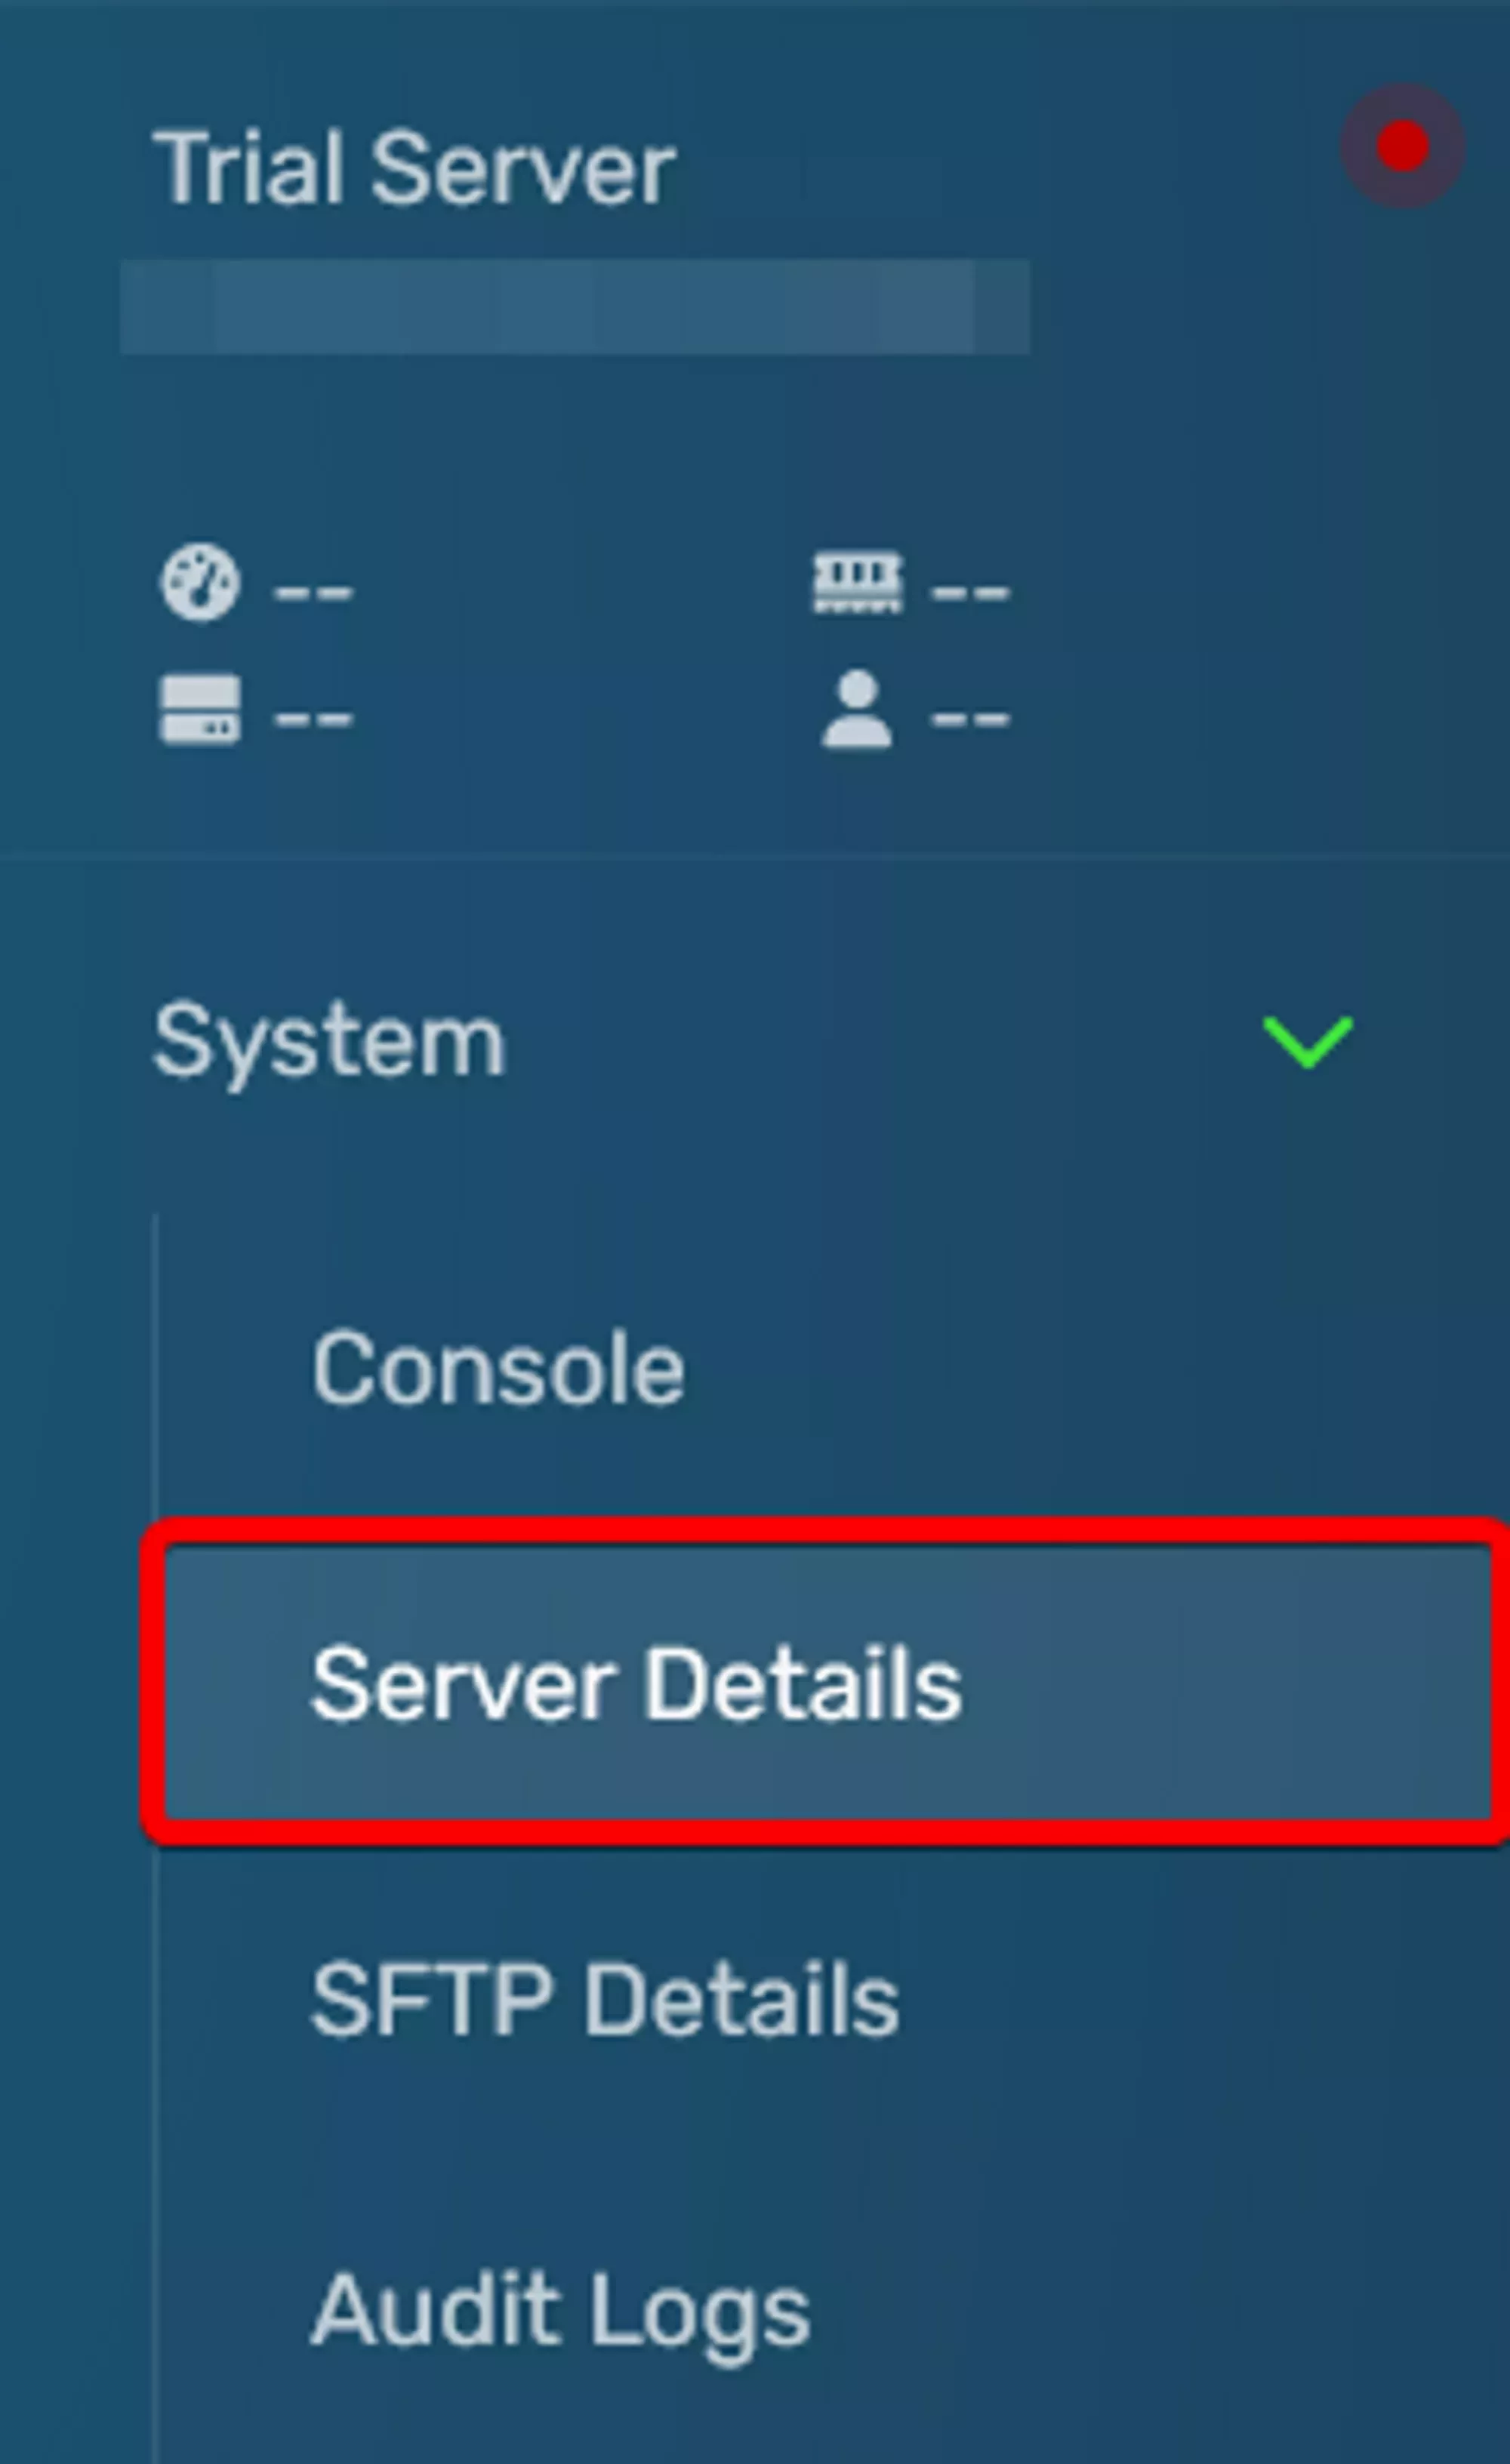 The Server Details button located under the System tab on the GCP Navbar